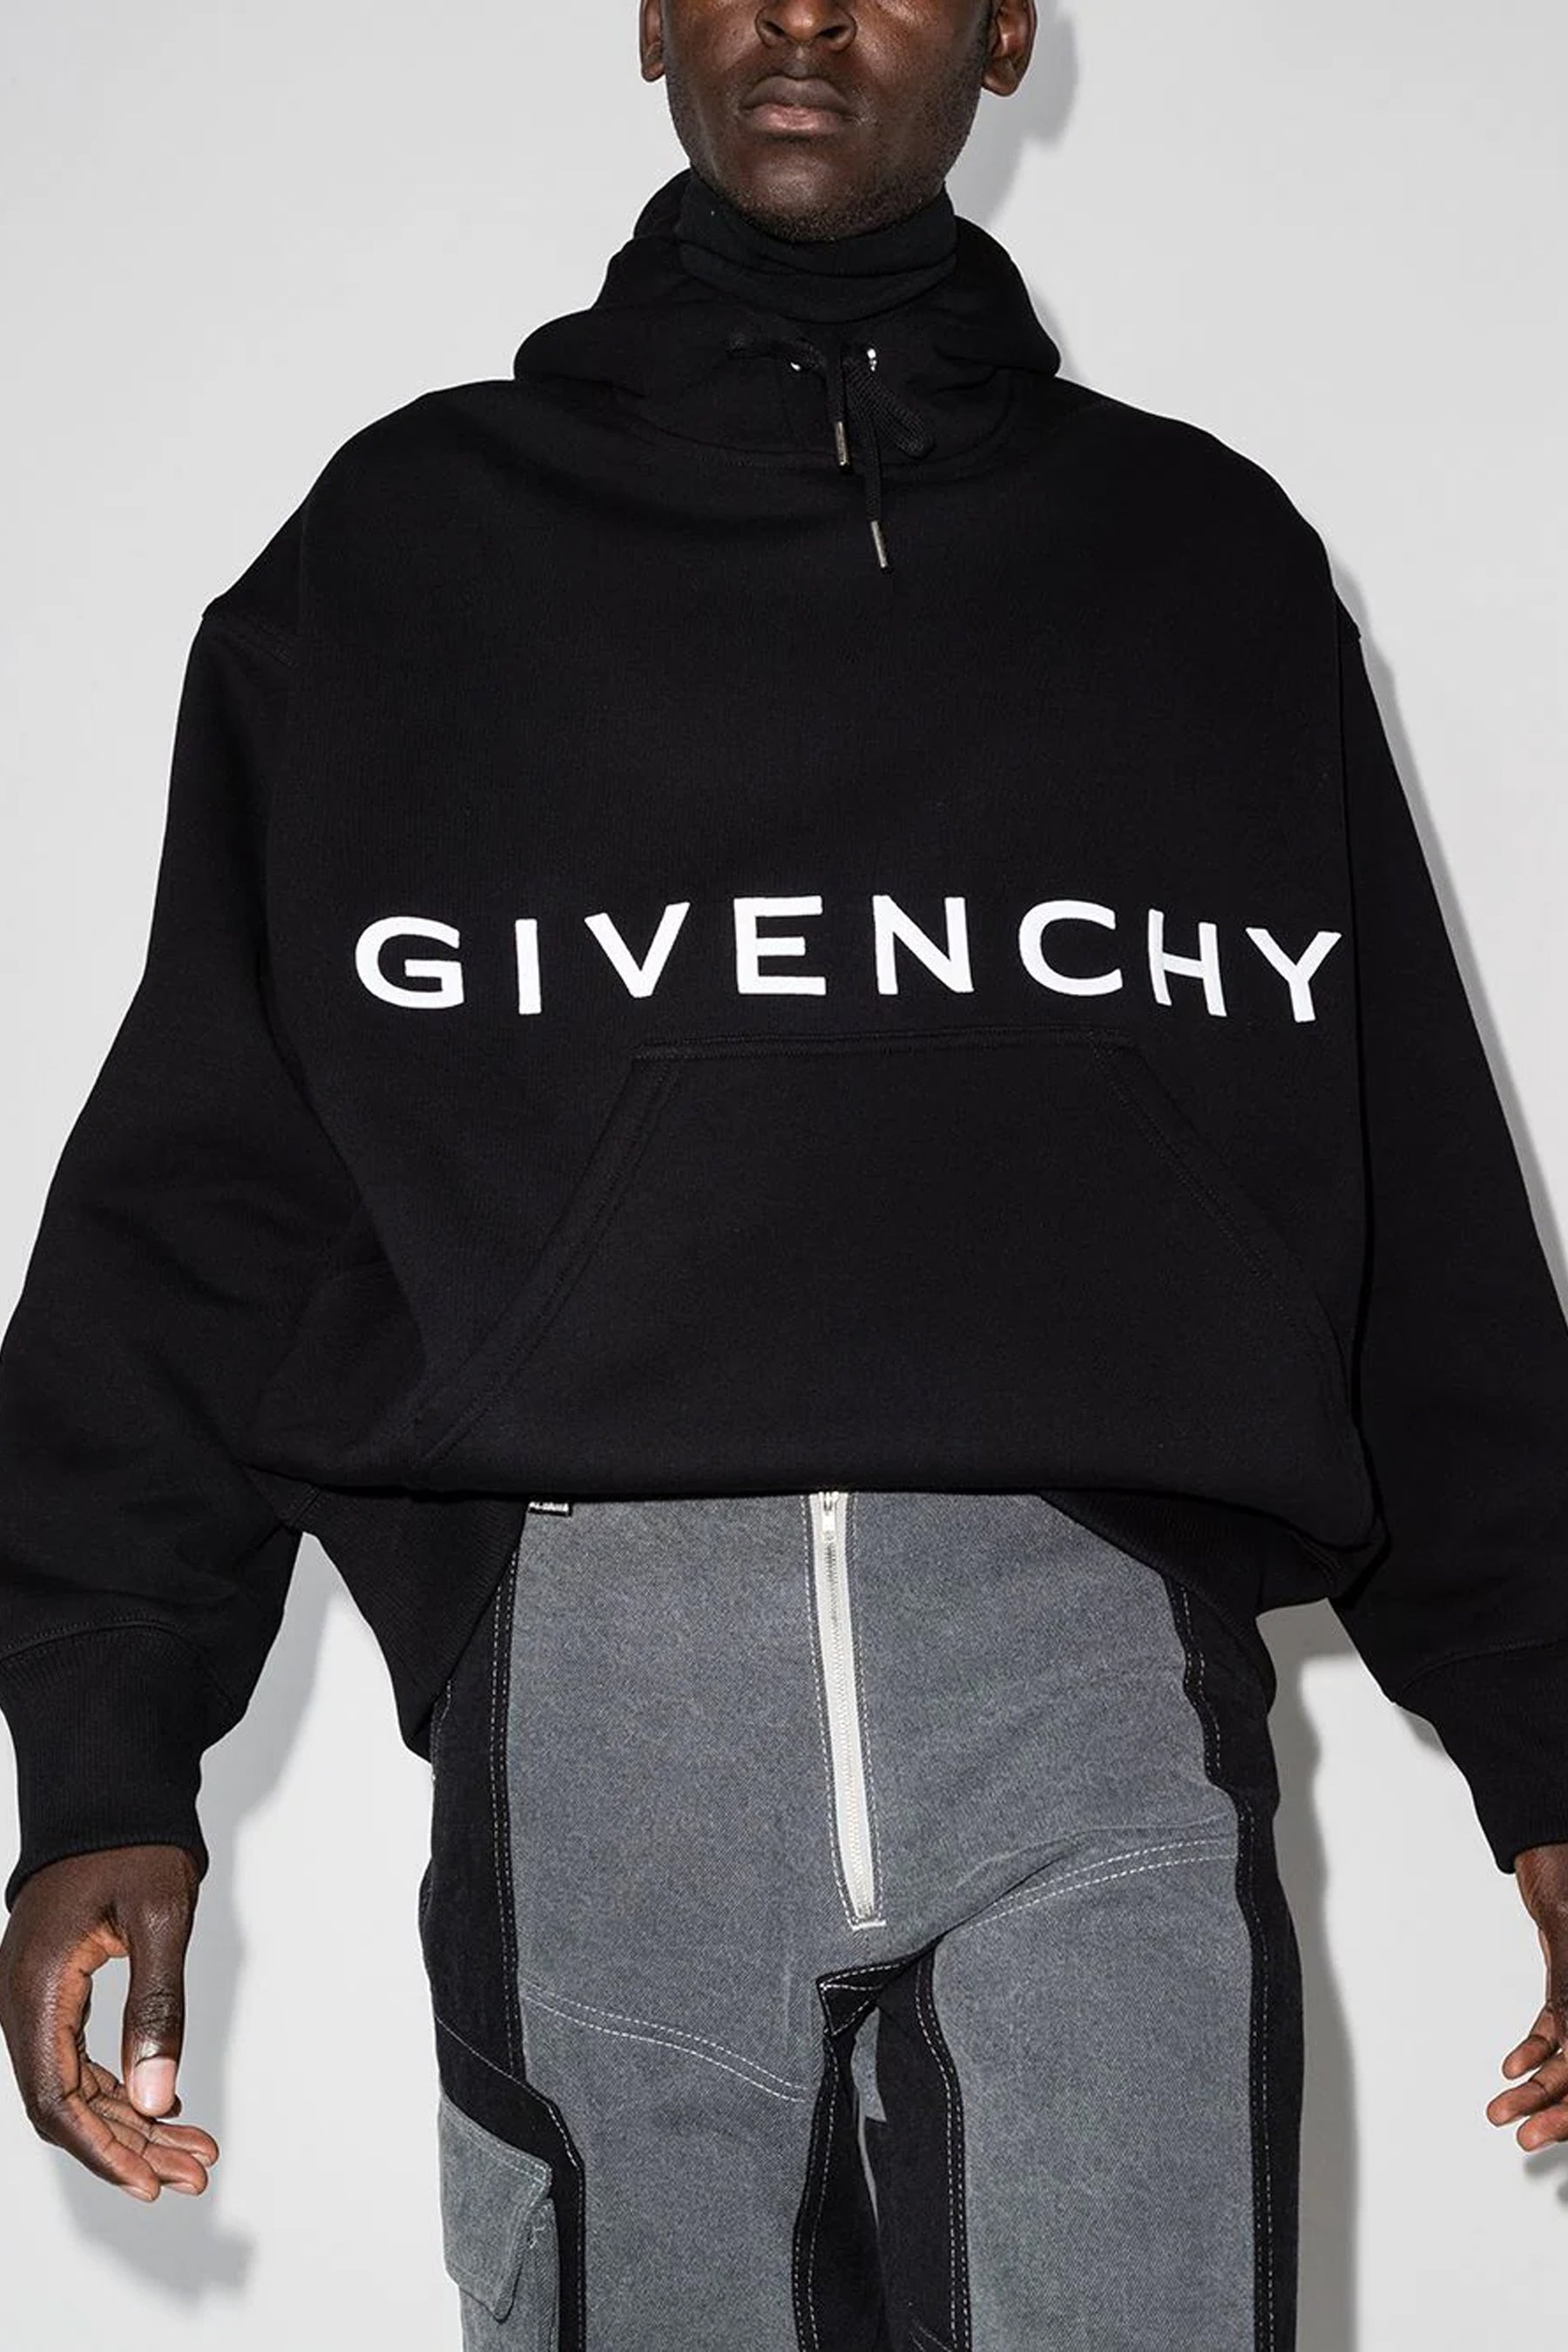 Givenchy front logo heavy brushed hoodie sweatshirt